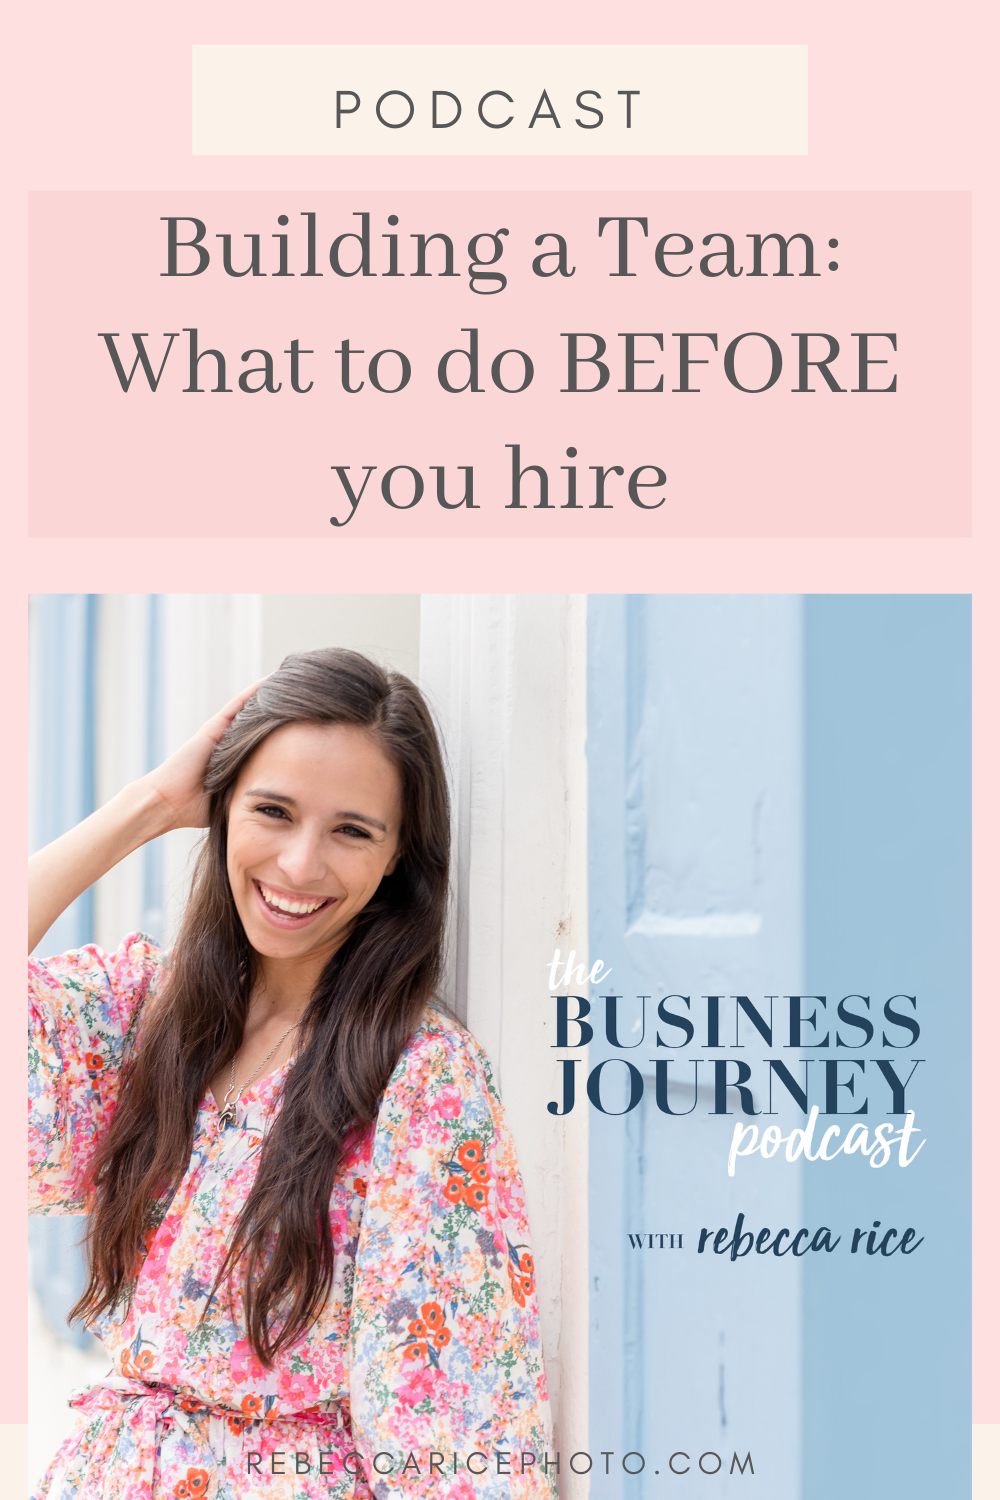 What to Do Before You Hire a Team as a Business Owner: tips for building your team from Rebecca Rice on the Business Journey Podcast